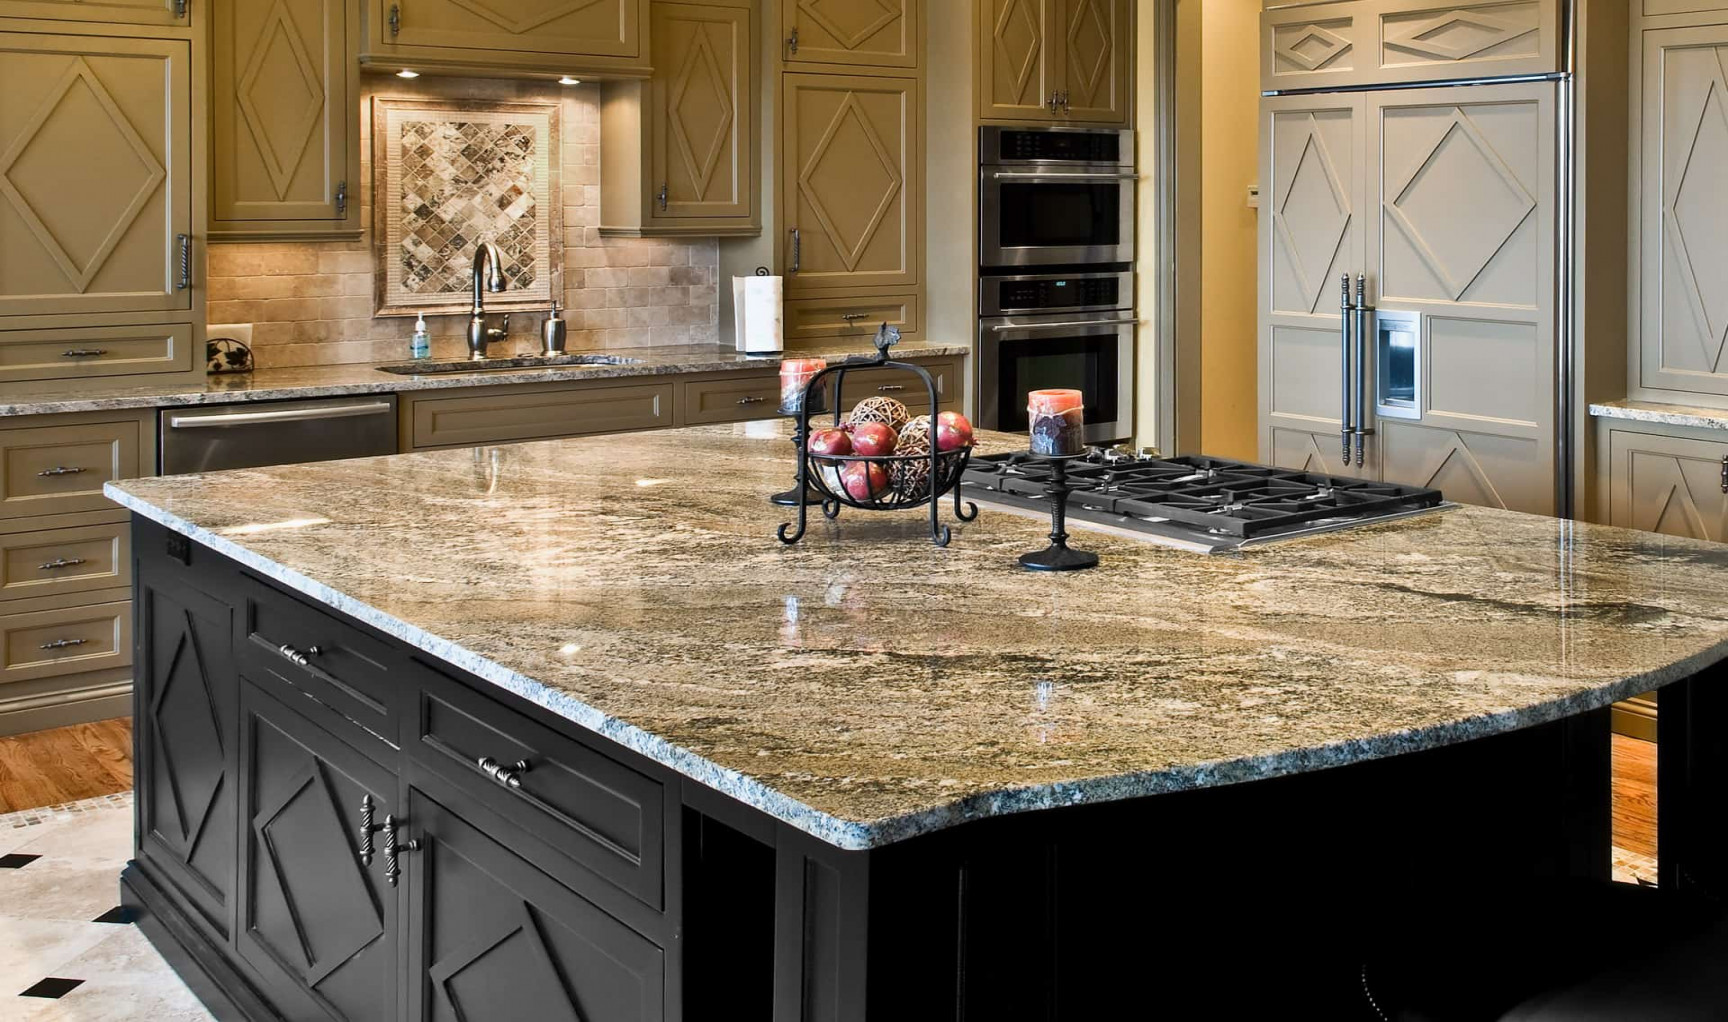 The Benefits of Engineered Stone Countertops  CounterTop Guides